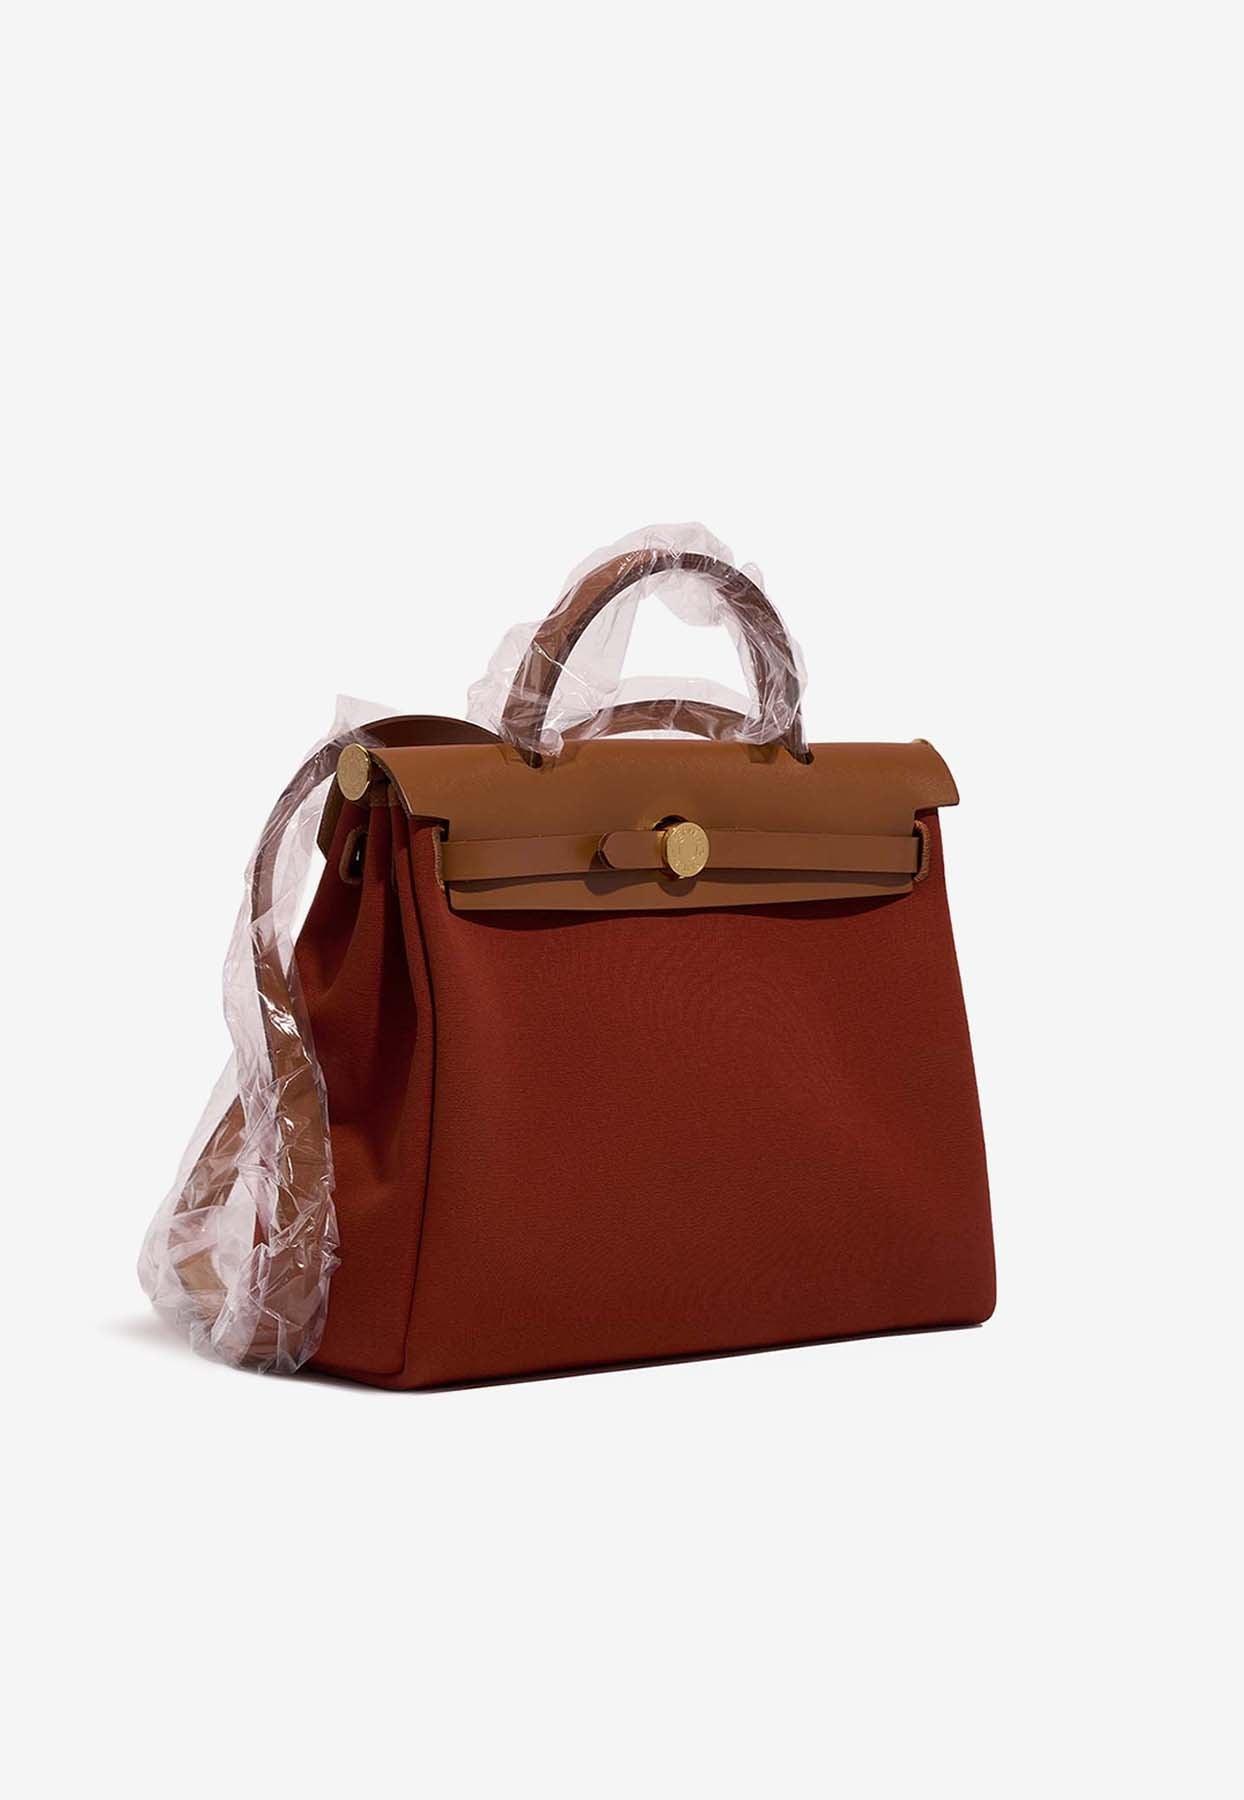 Hermes Brown Vache Leather and Toile Herbag PM with Gold Hardware